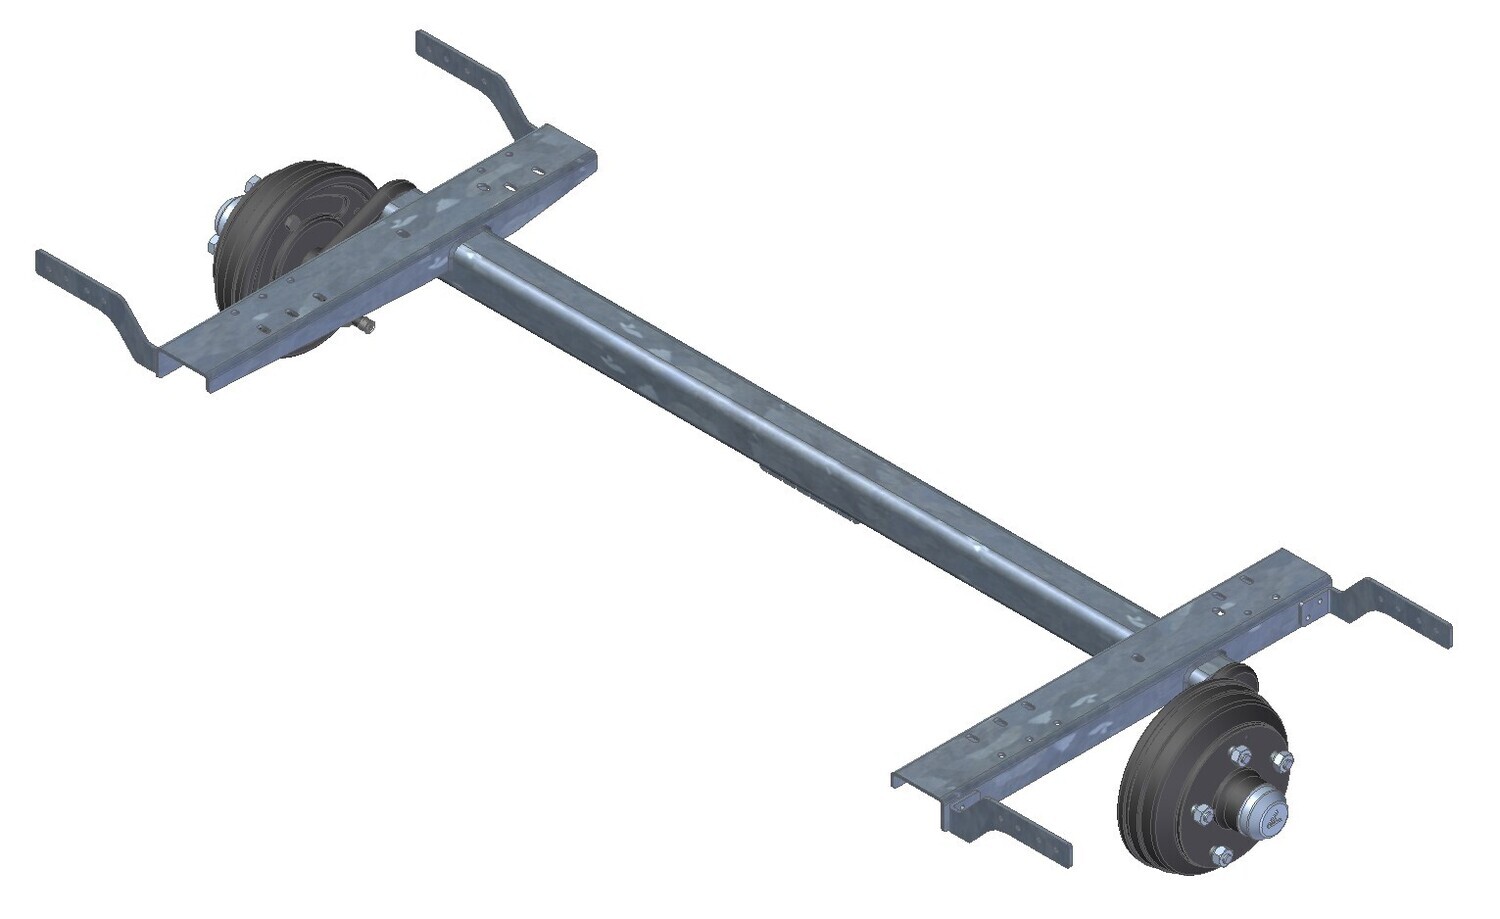 1800kg braked trailer axle for 1820mm wide chassis